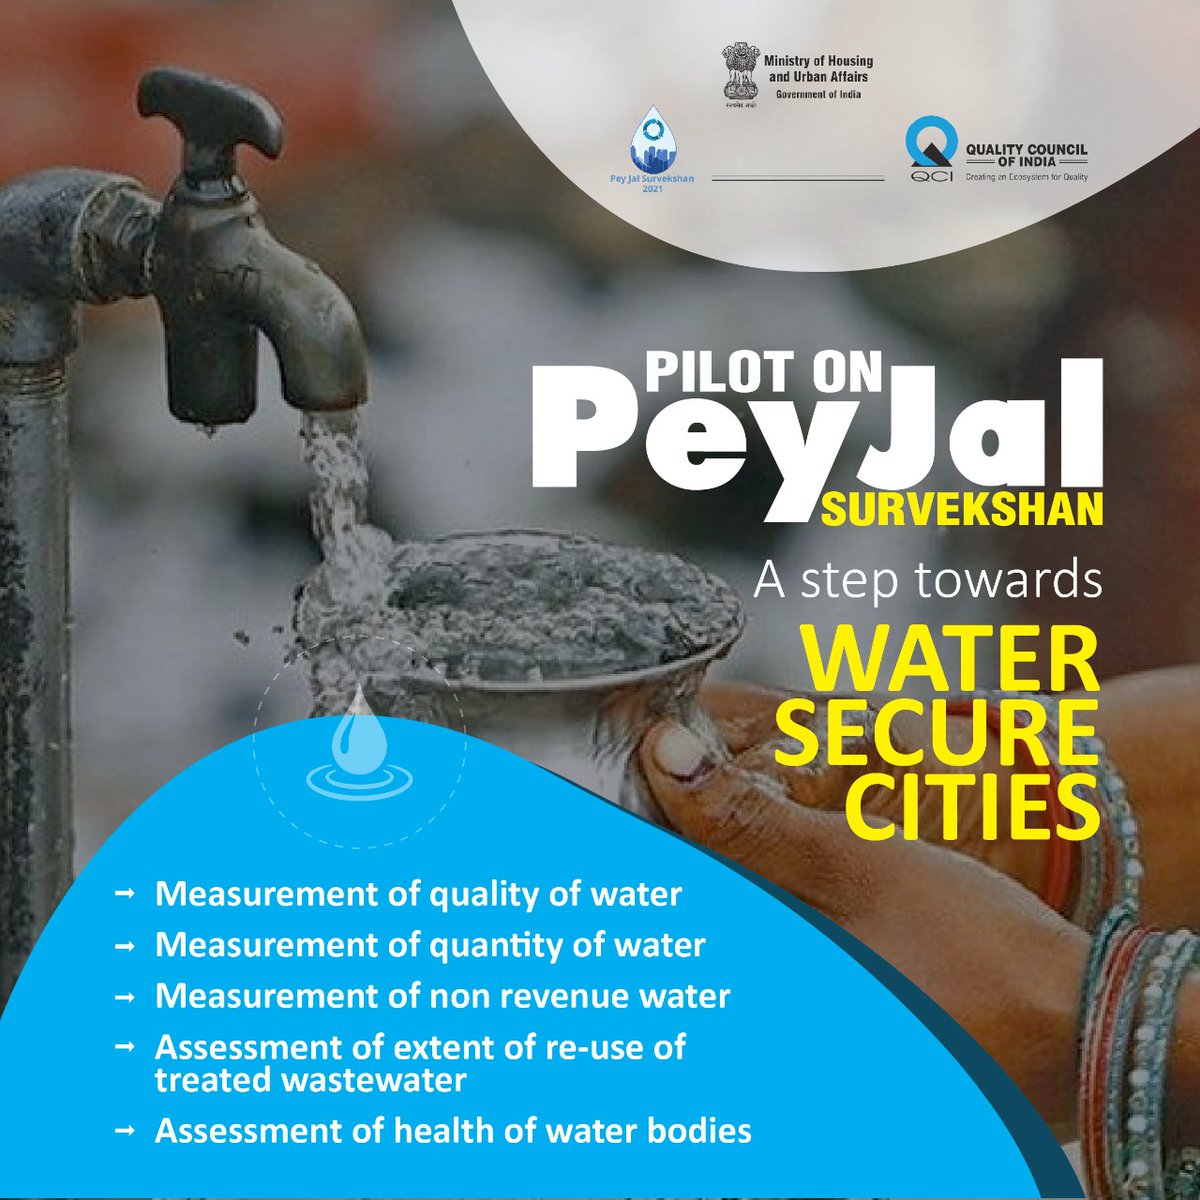 PeyJal Survekshan- A step towards water secure cities

-Measurement of quality of water 
-Measurement of quantity of water 
-Measurement of non revenue water 
-Assessment of extent of re-use of treated wastewater 
-Assessment of health of water bodies

#Humara_Shahar_Humara_Pani